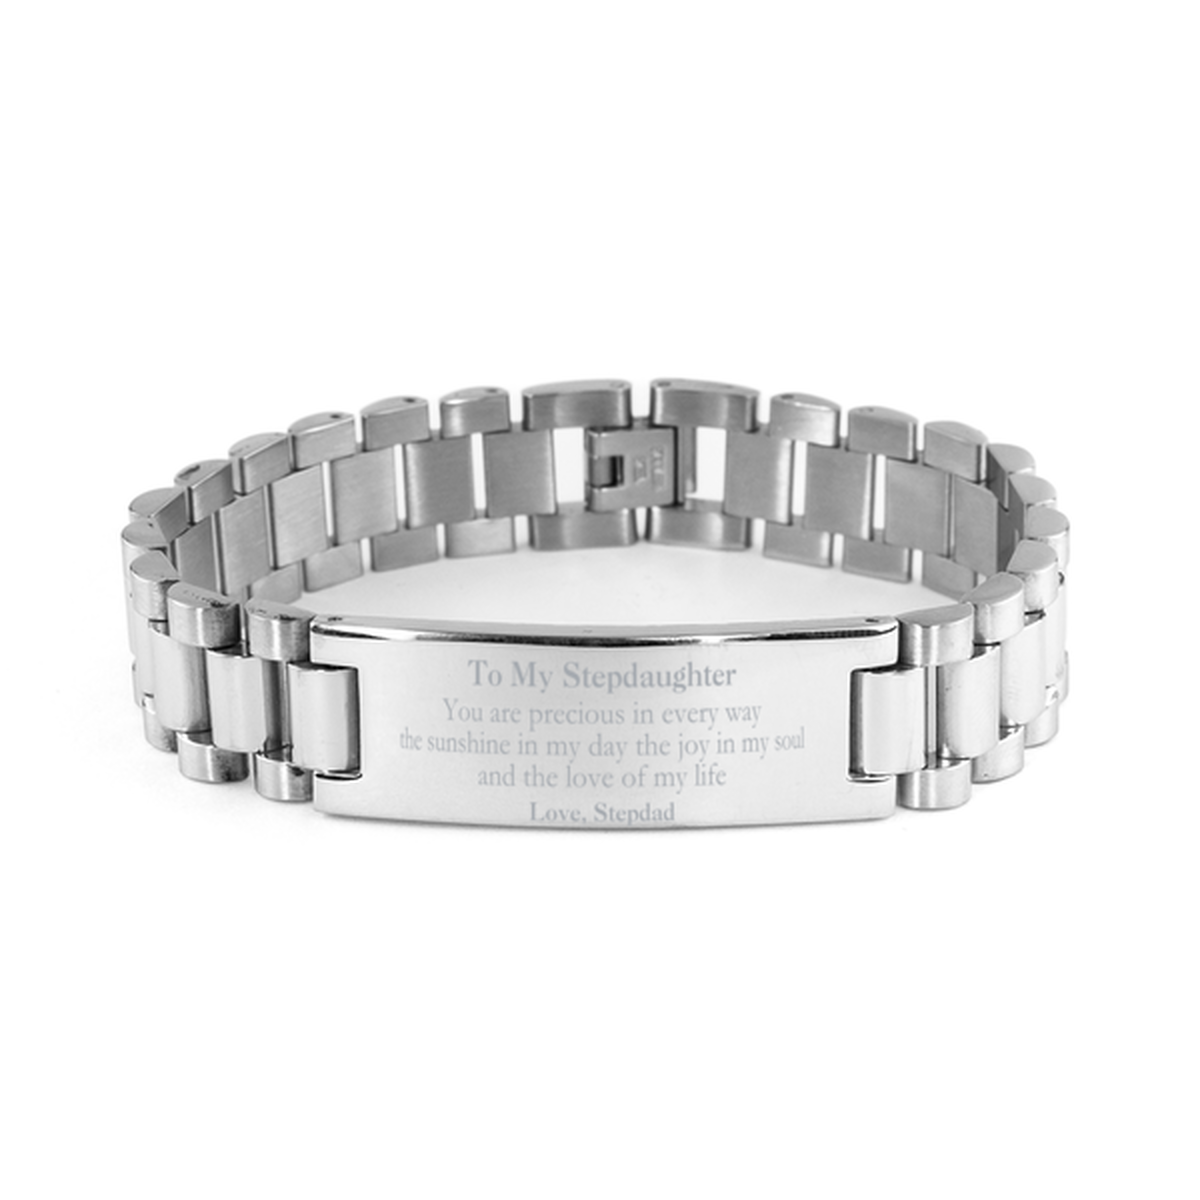 Graduation Gifts for Stepdaughter Ladder Stainless Steel Bracelet Present from Stepdad, Christmas Stepdaughter Birthday Gifts Stepdaughter You are precious in every way the sunshine in my day. Love, Stepdad